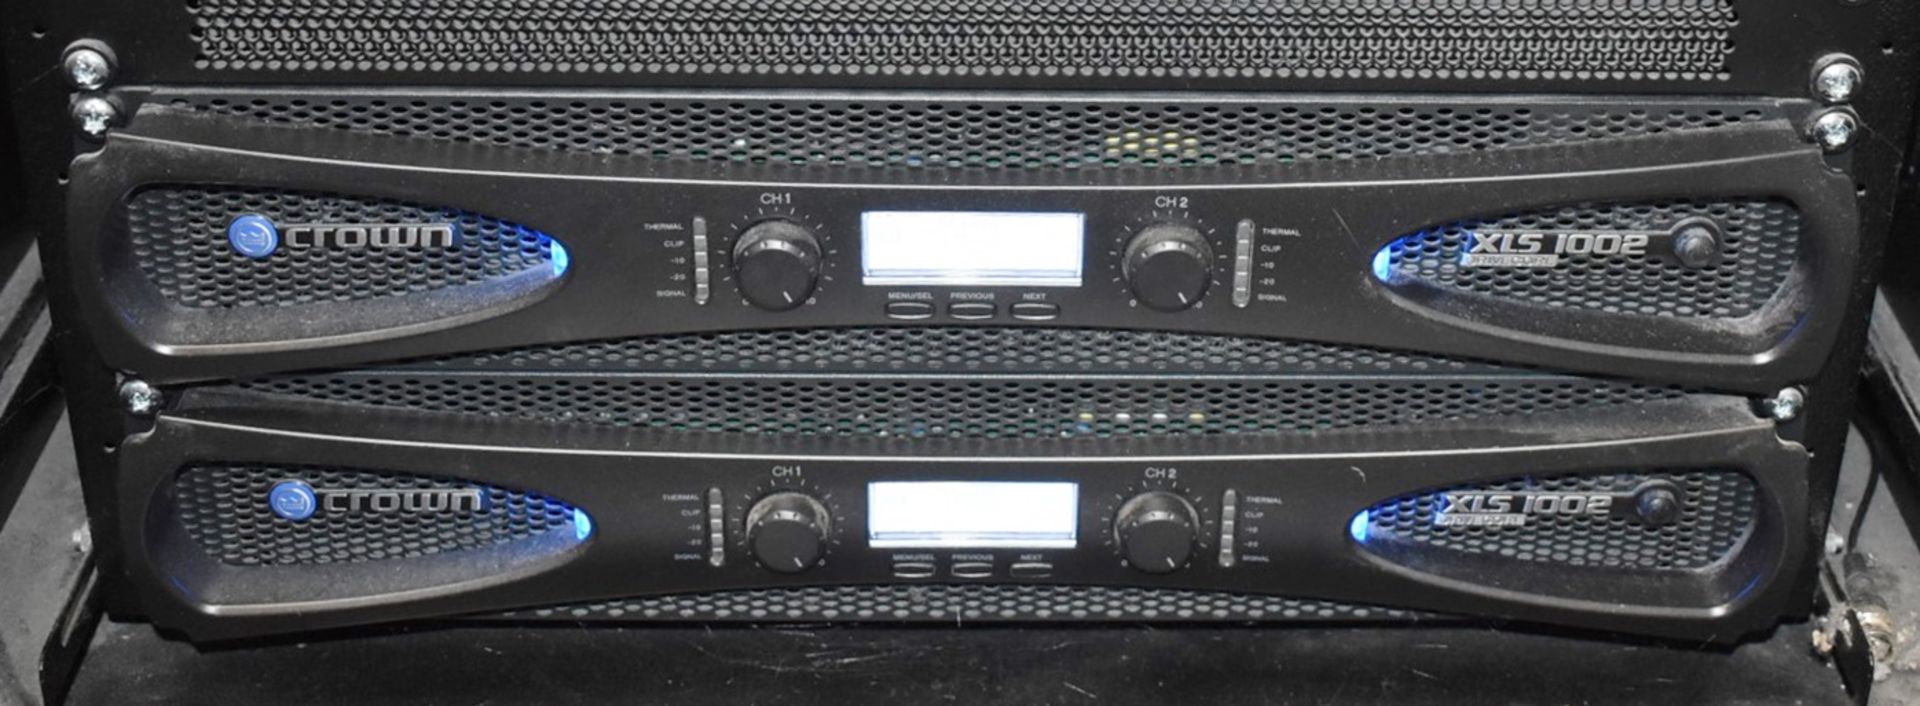 1 x Crown XLS-1002 DriveCore 2 Stereo Power Amplifier £499 - Image 4 of 4